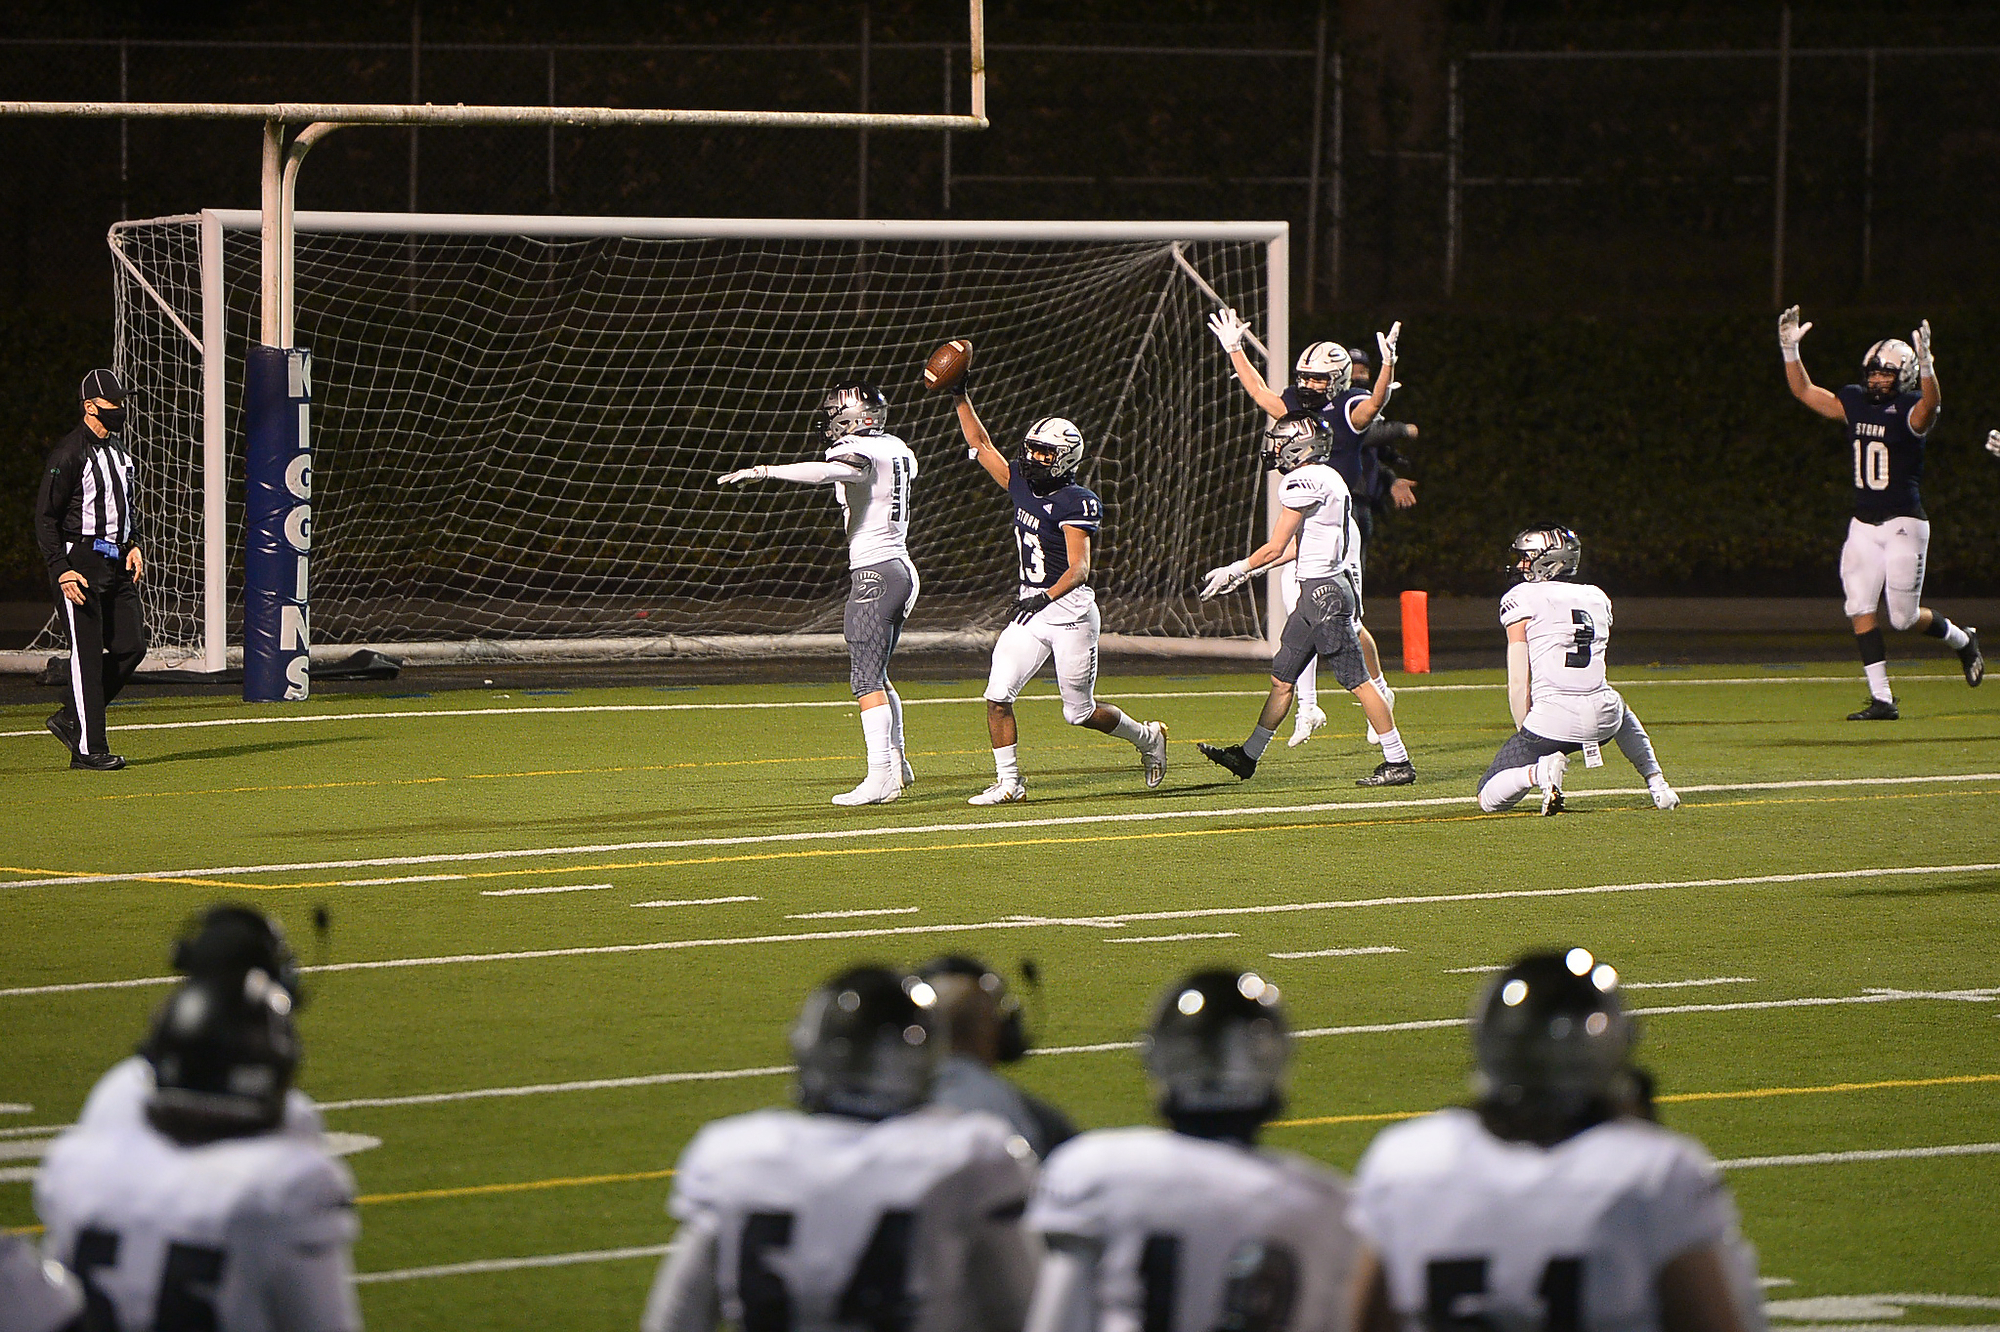 Skyview's Xavier Owens, center, celebrates a game winning touchdown against Union at Kiggins Bowl on Friday night, March 12, 2021.